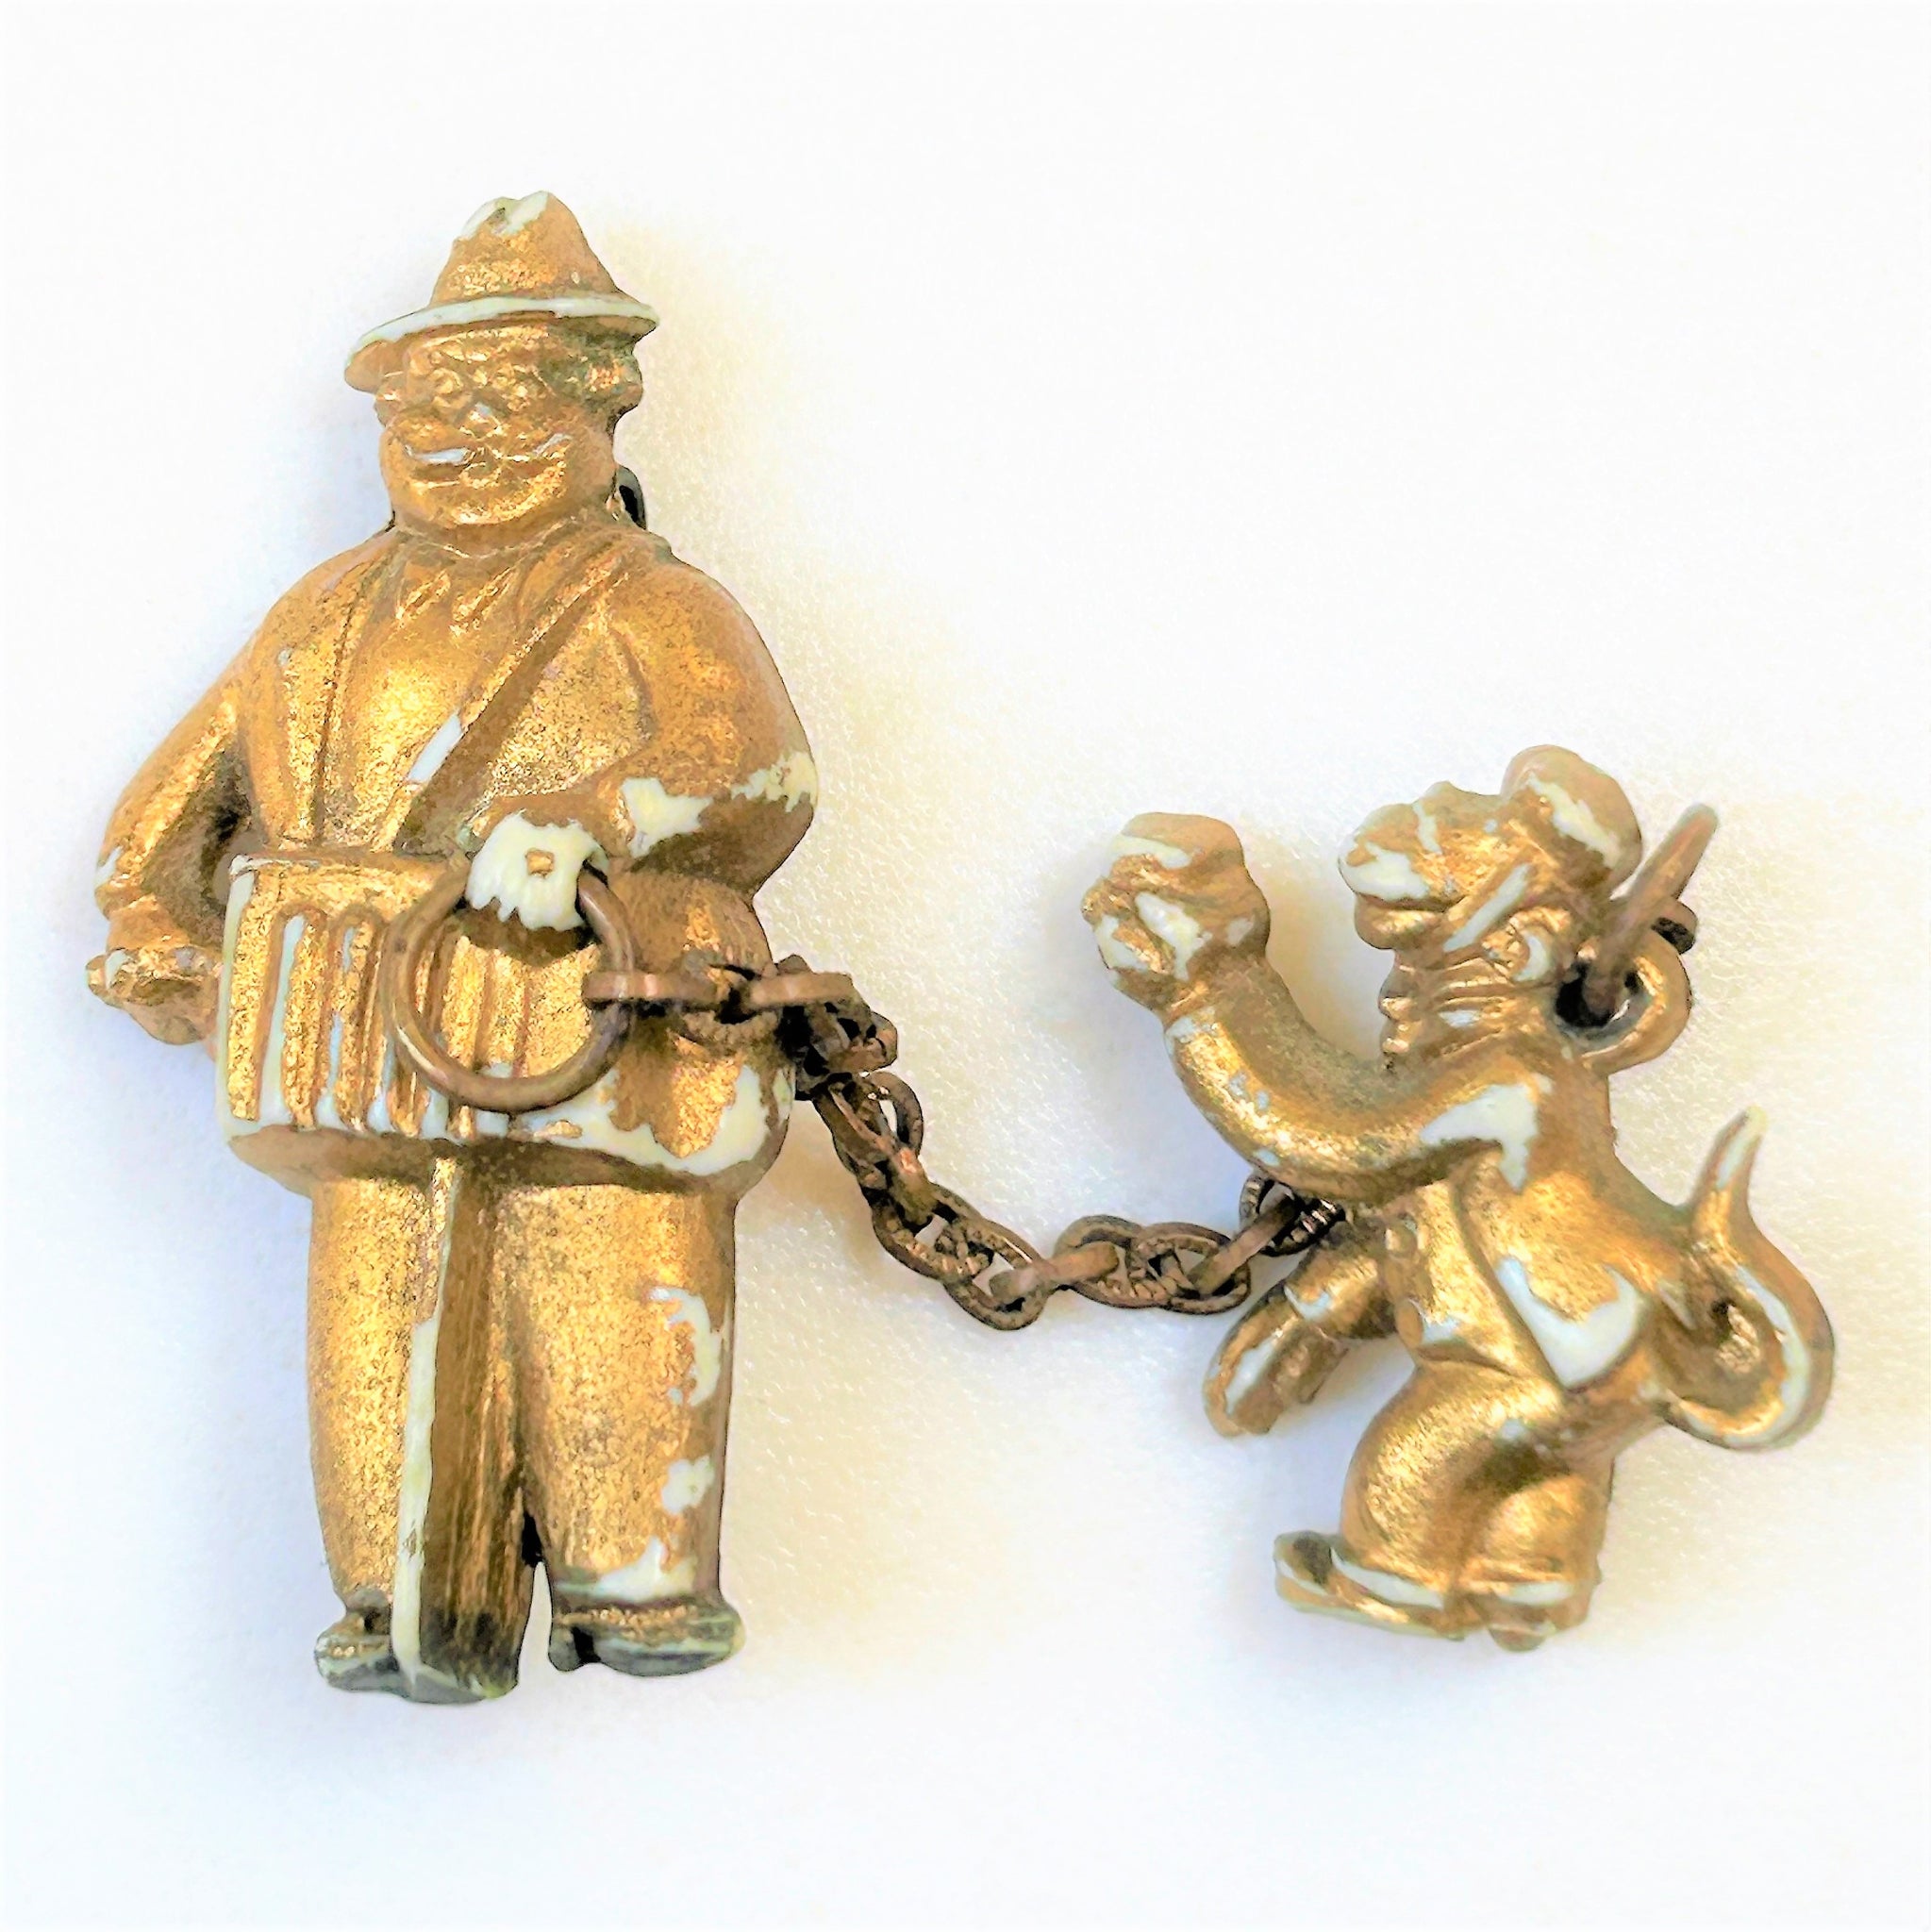 Vintage Novelty Brooch of “Man with Monkey”